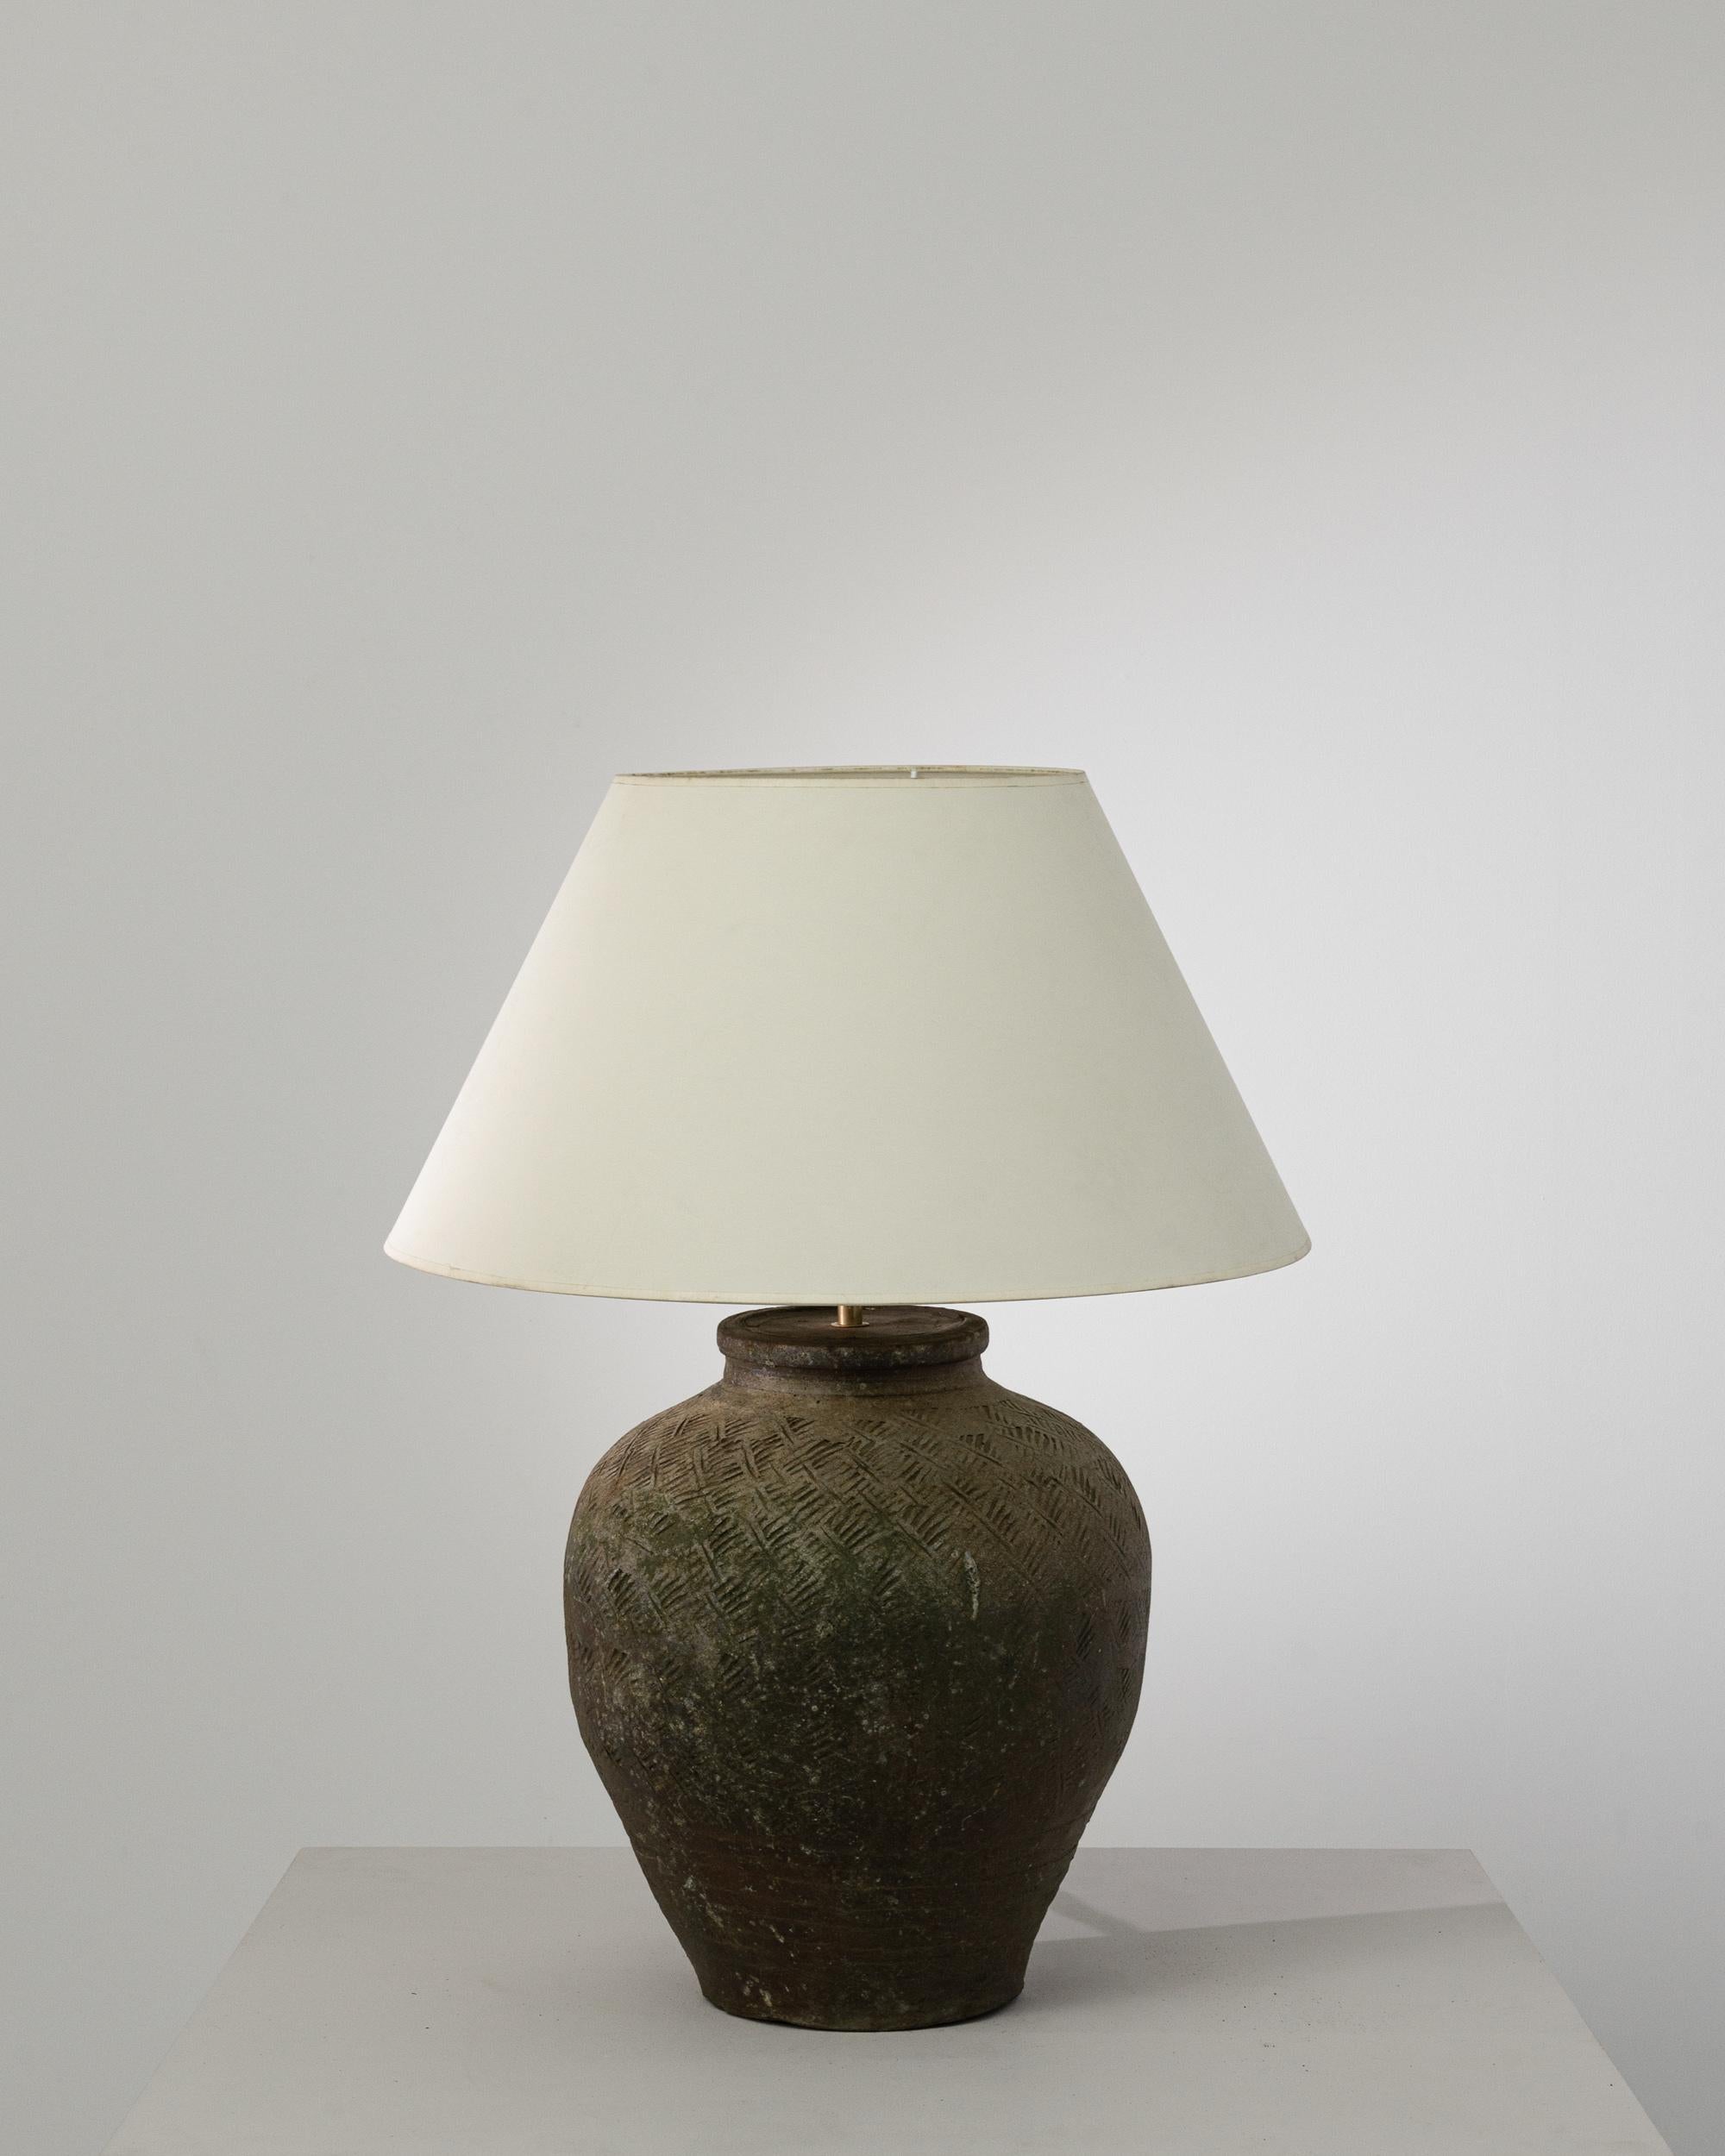 An extraordinary piece to inspire your collection. This vintage Chinese vase has been adapted into a beautiful table lamp. Polished brass meets the seductive warm brown glaze, enlightening your space with an uncompromising contrast. The textured